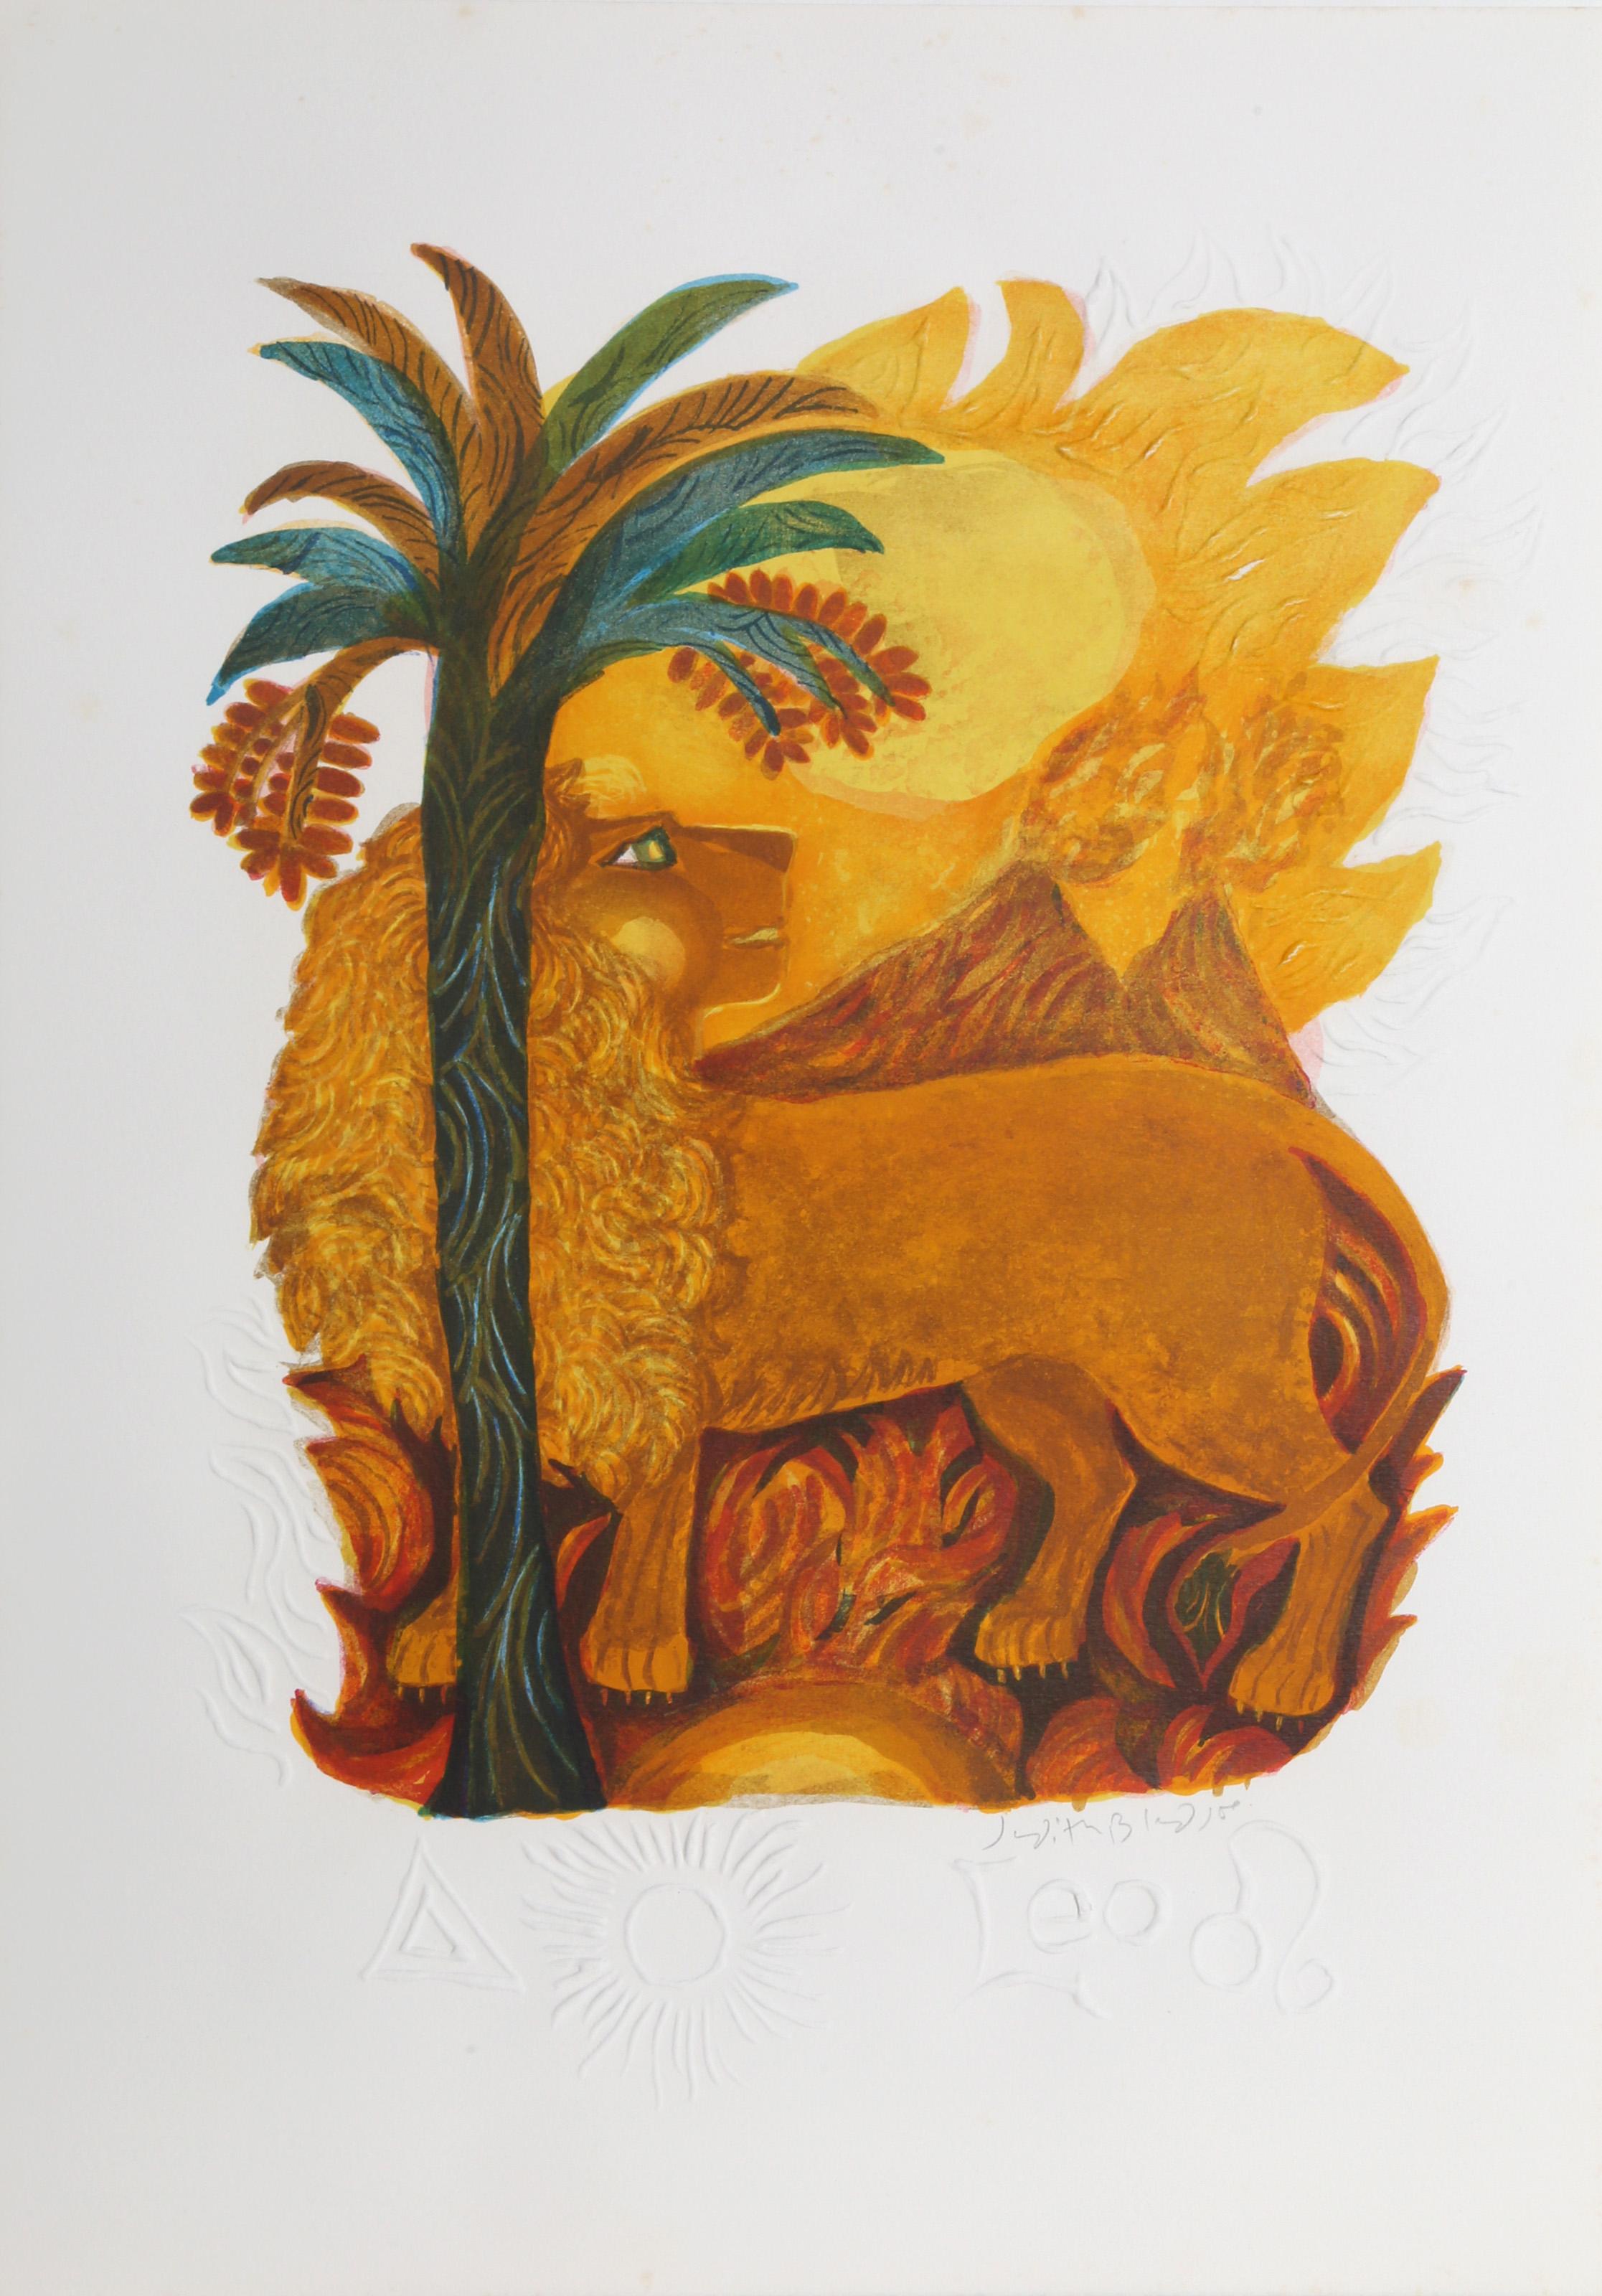 Judith Bledsoe, American (1938 - 2013) -  Leo from the Zodiac of Dreams Series. Year: circa 1970, Medium: Lithograph with Embossing, signed in pencil, Edition: EA, Size: 21 x 14.5 in. (53.34 x 36.83 cm), Description: Partially obscured by a palm